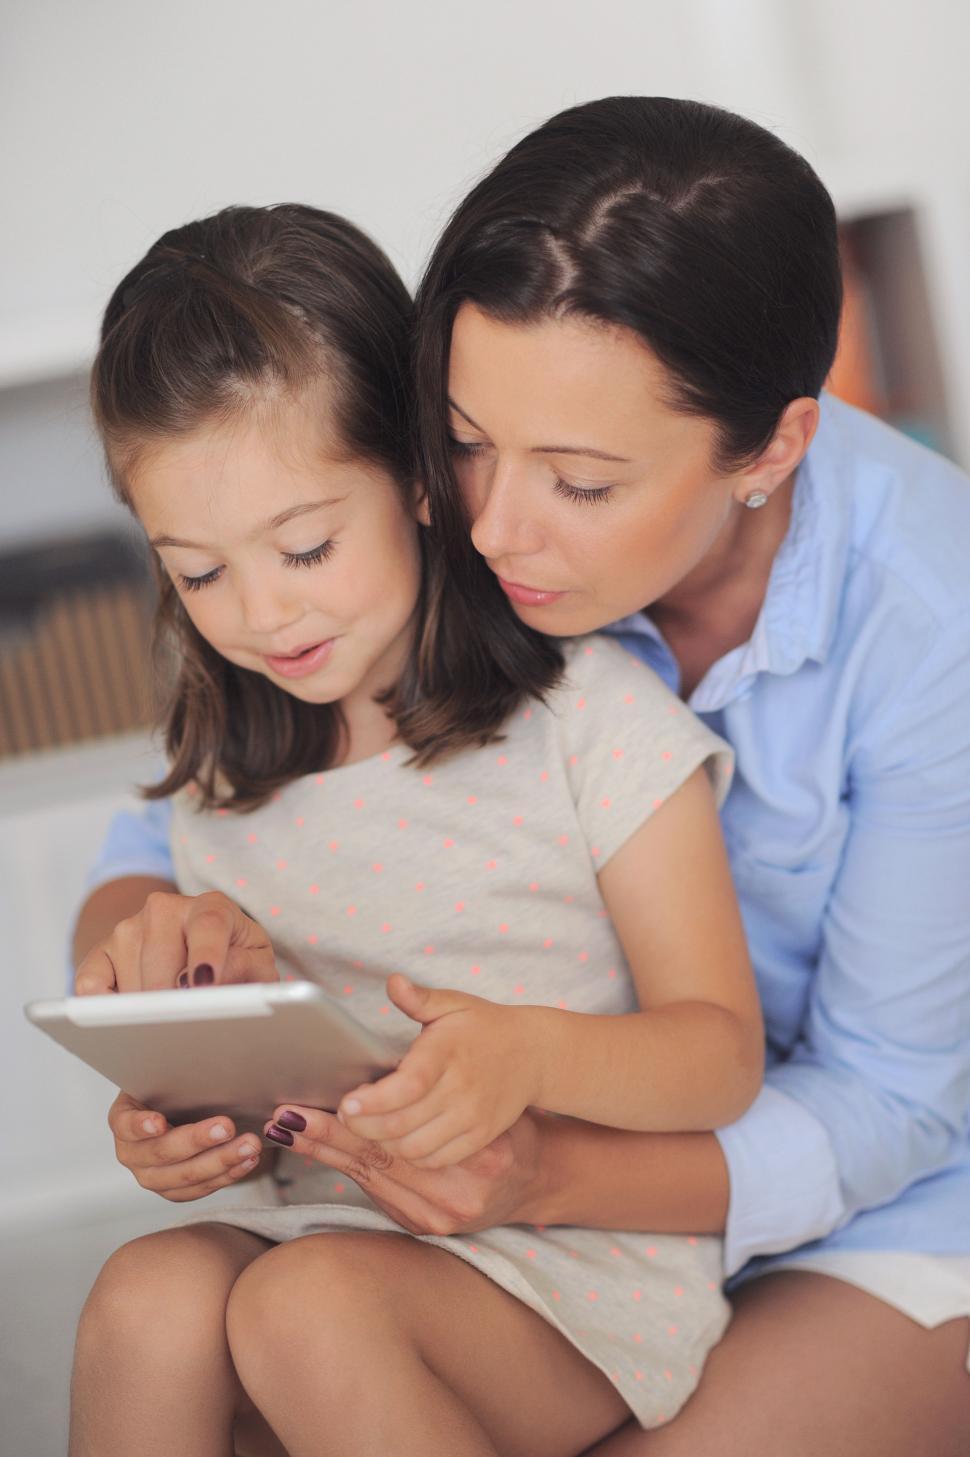 Free Image of Mother and daughter working together on a tablet computer 